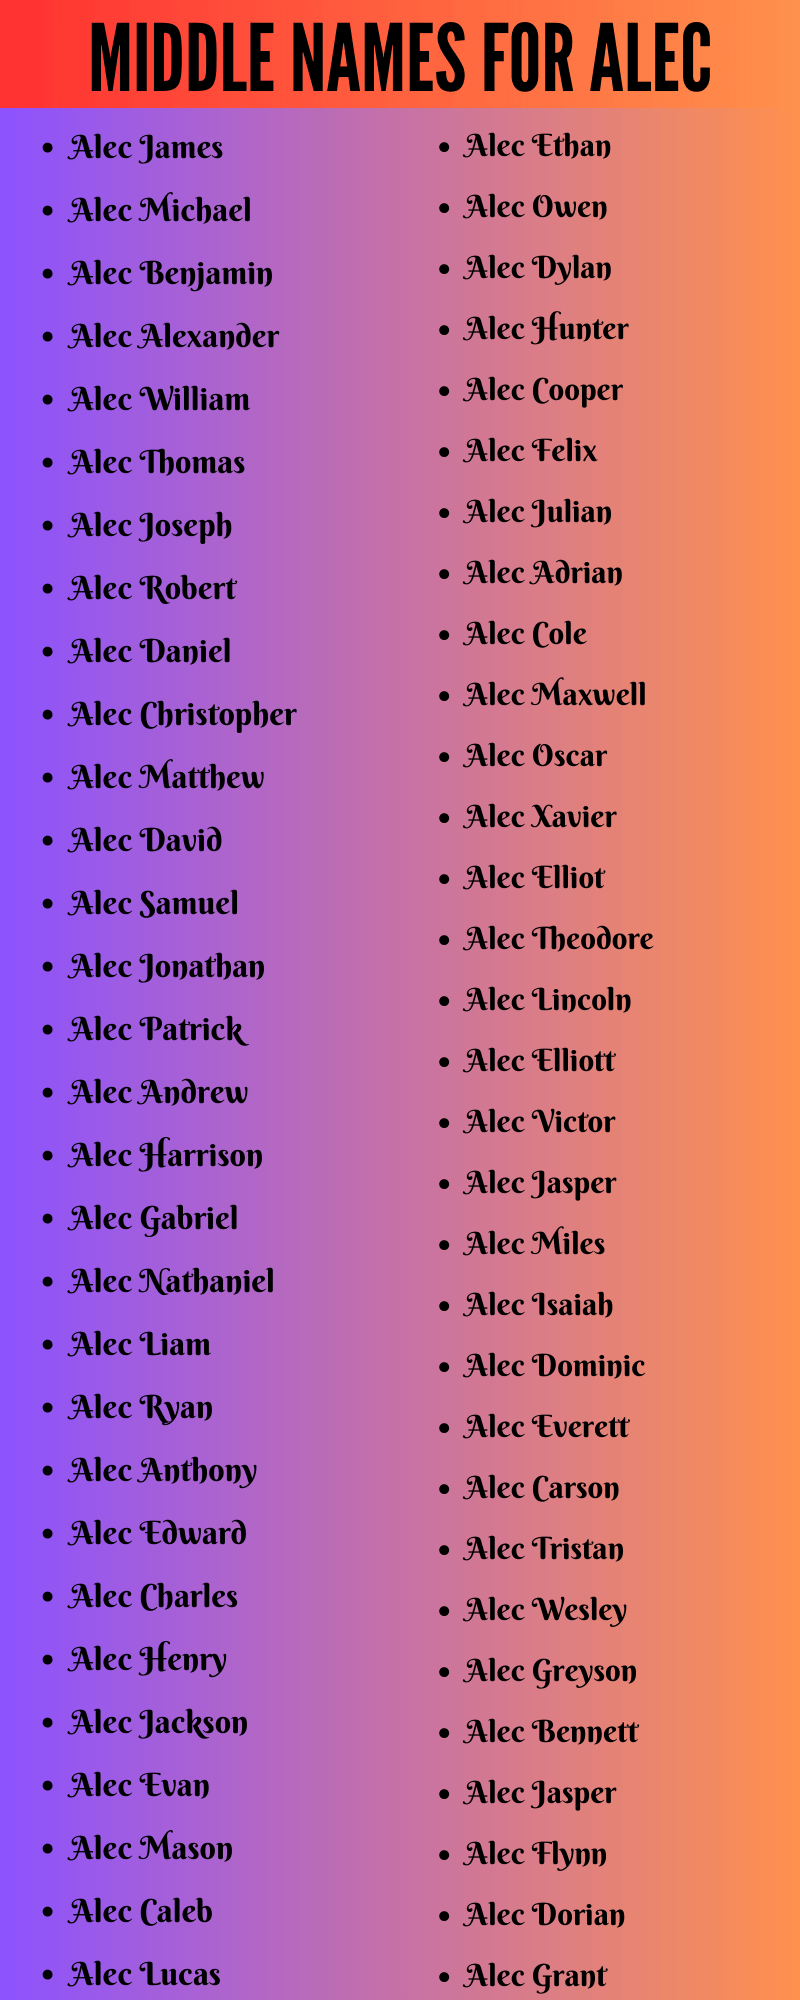 400 Middle Names For Alec